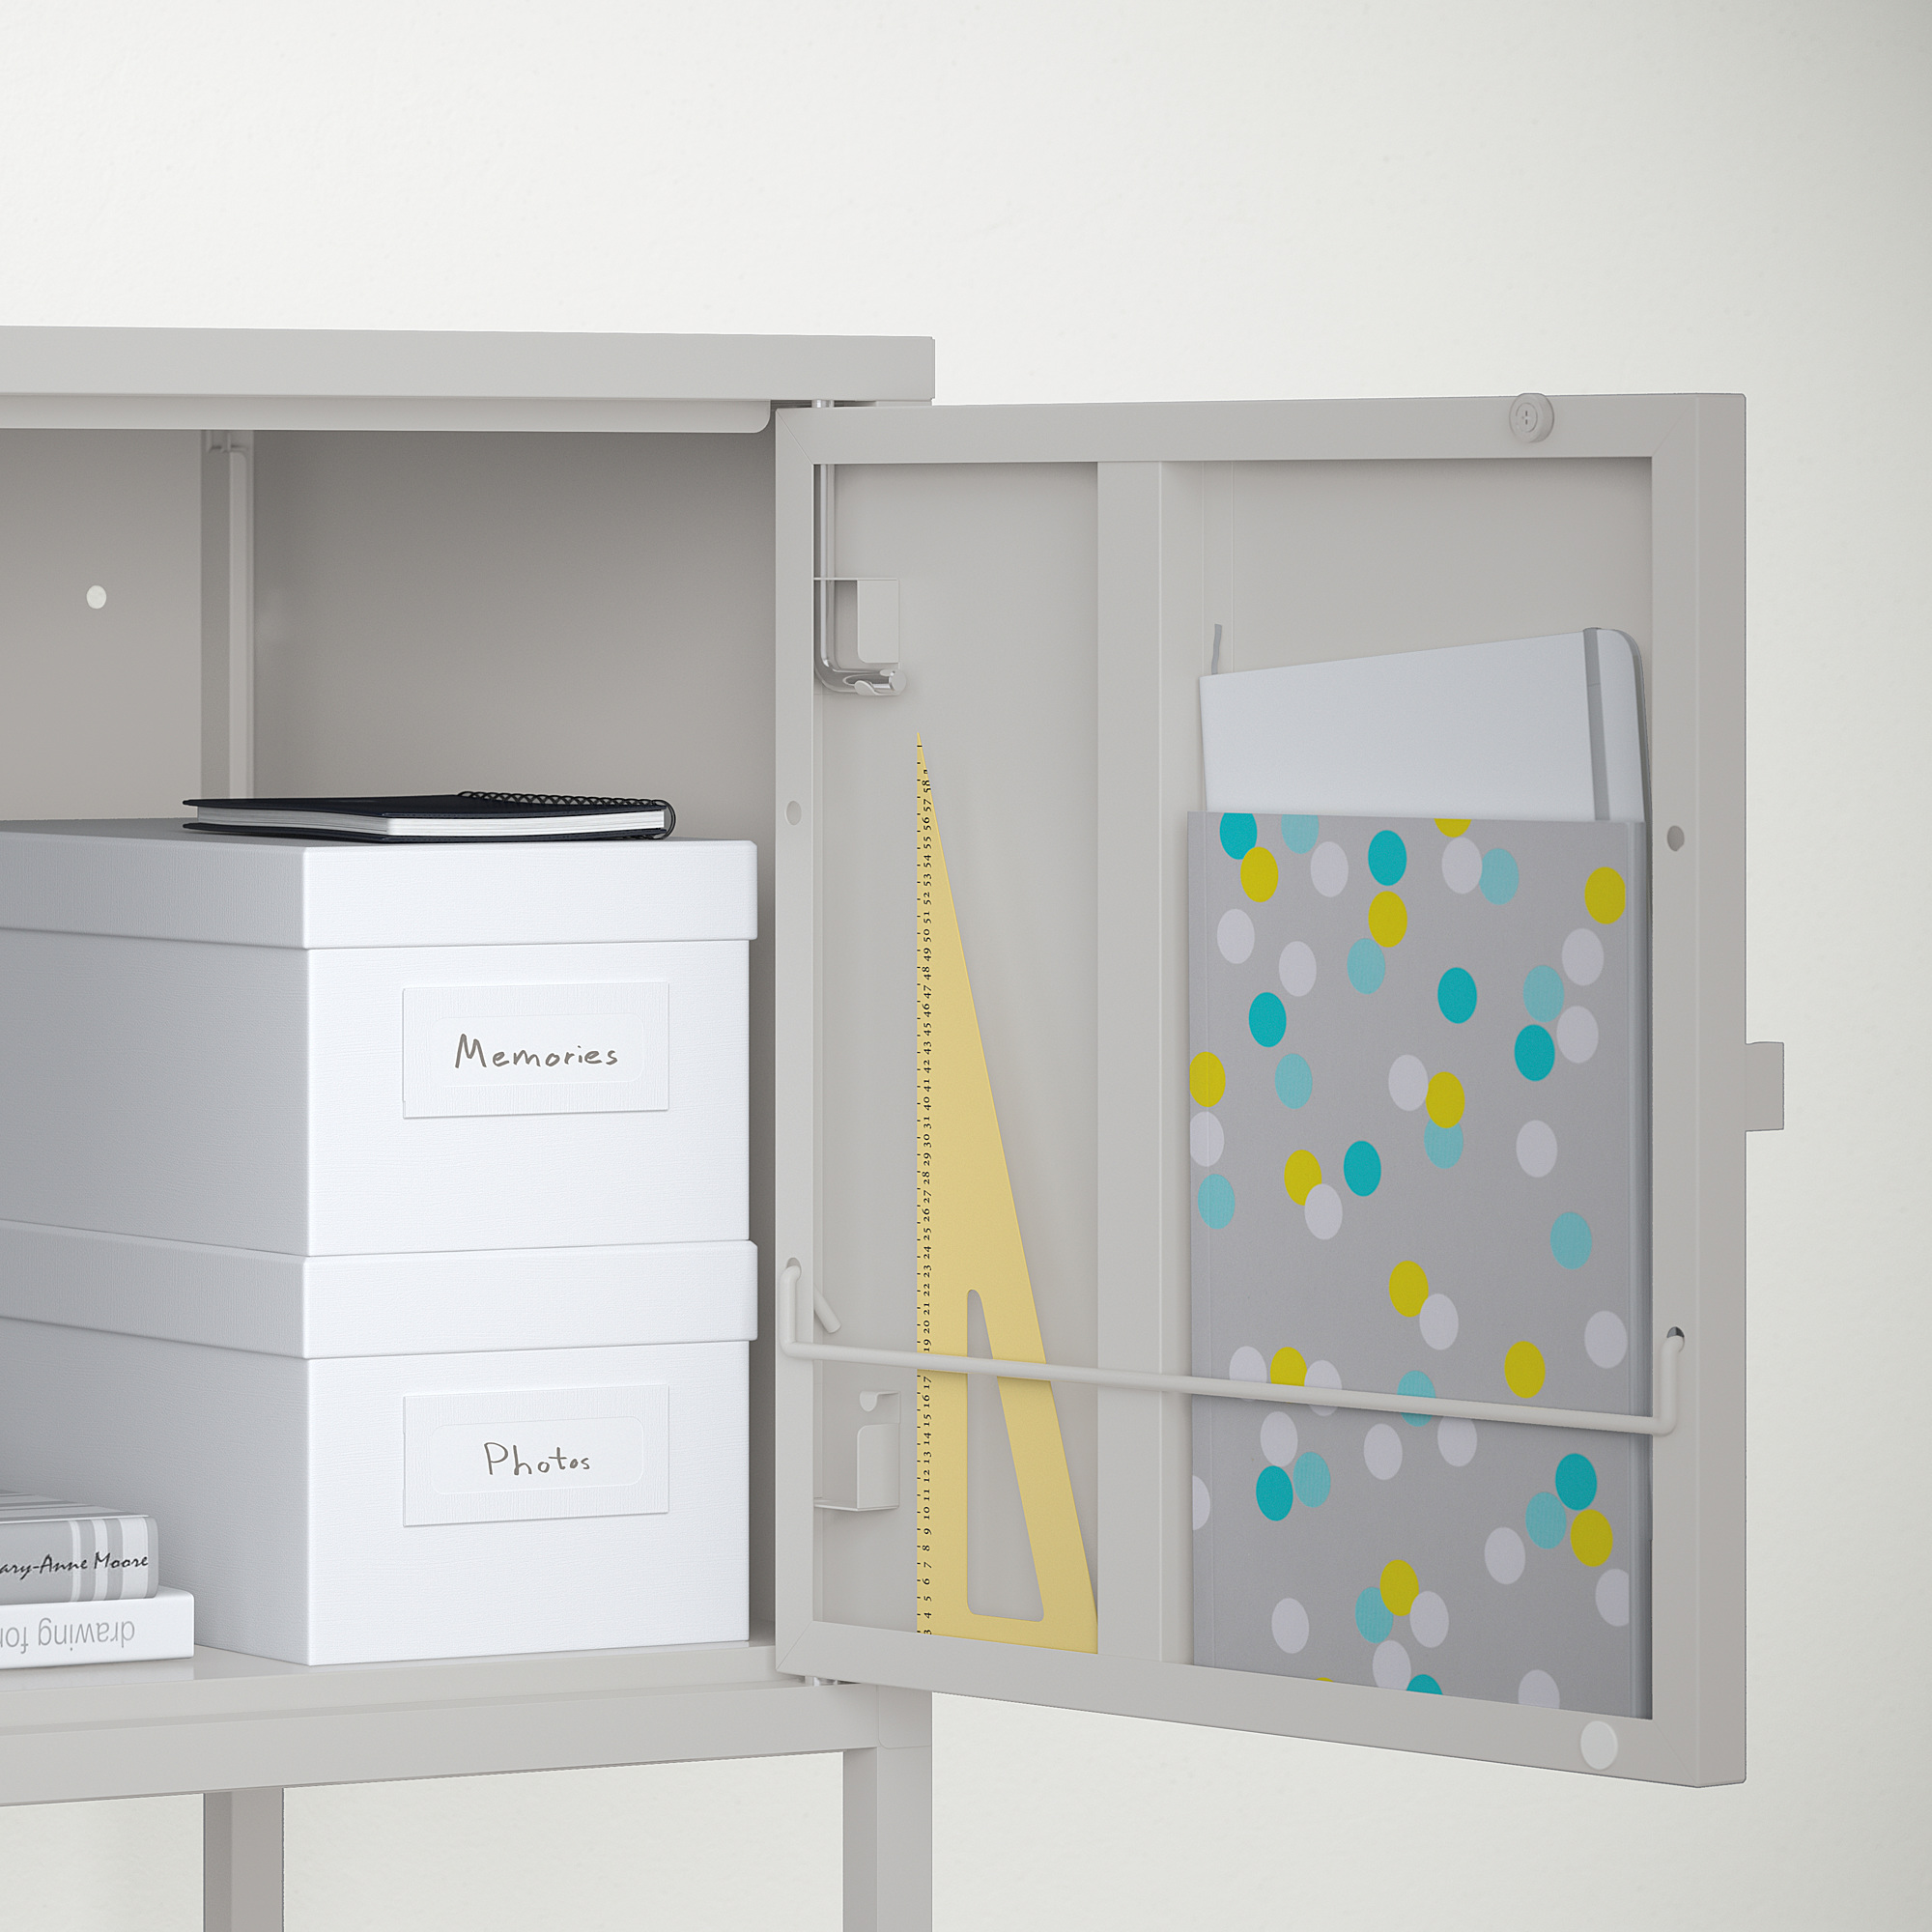 LIXHULT cabinet combination